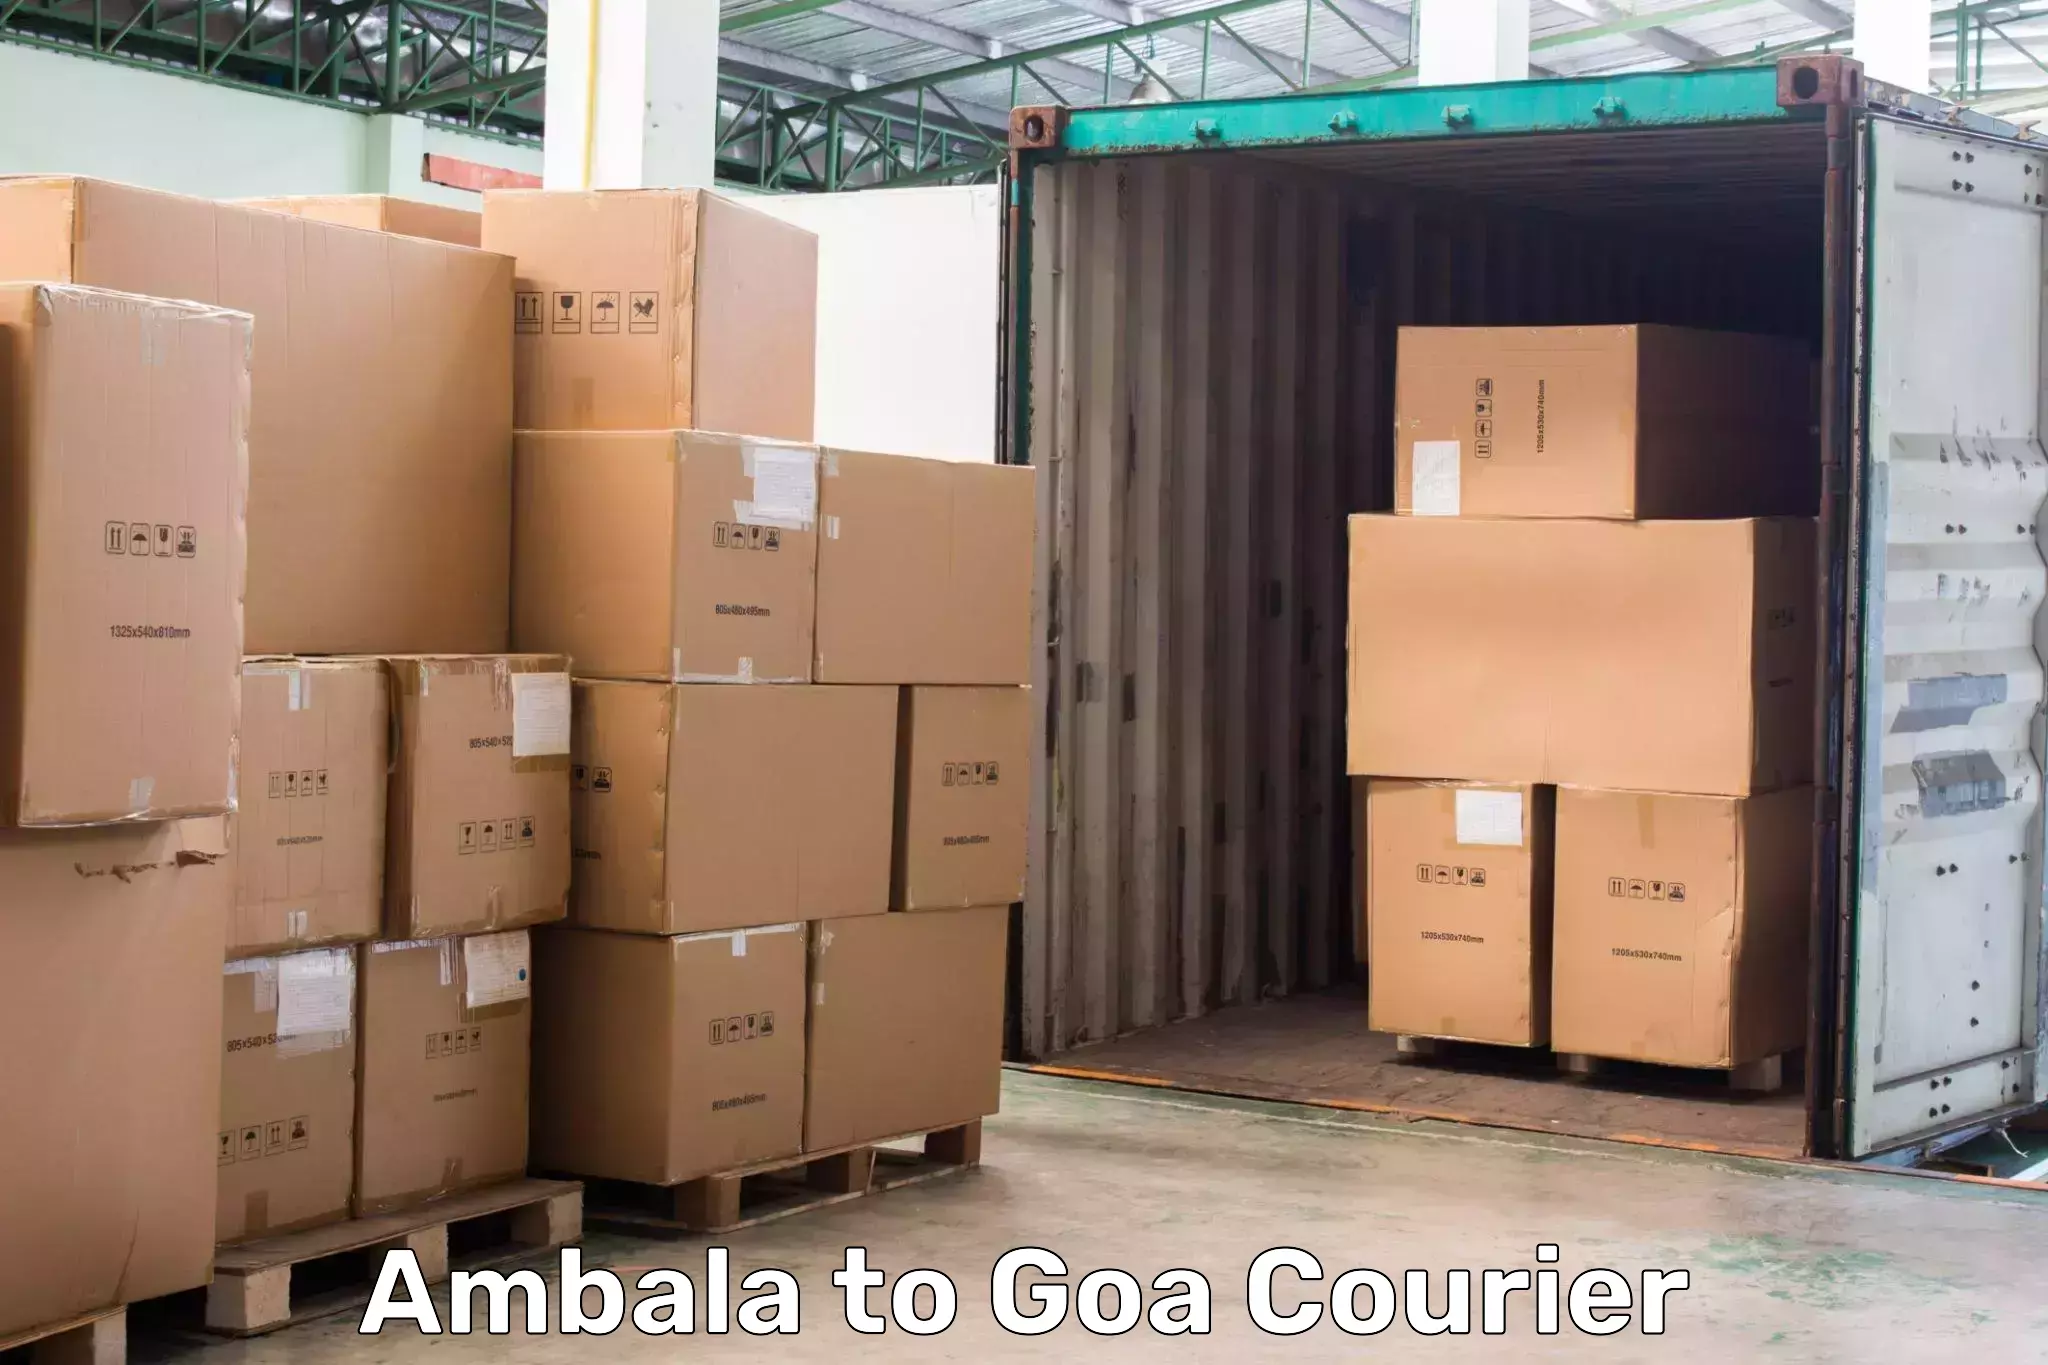 24/7 courier service in Ambala to Goa